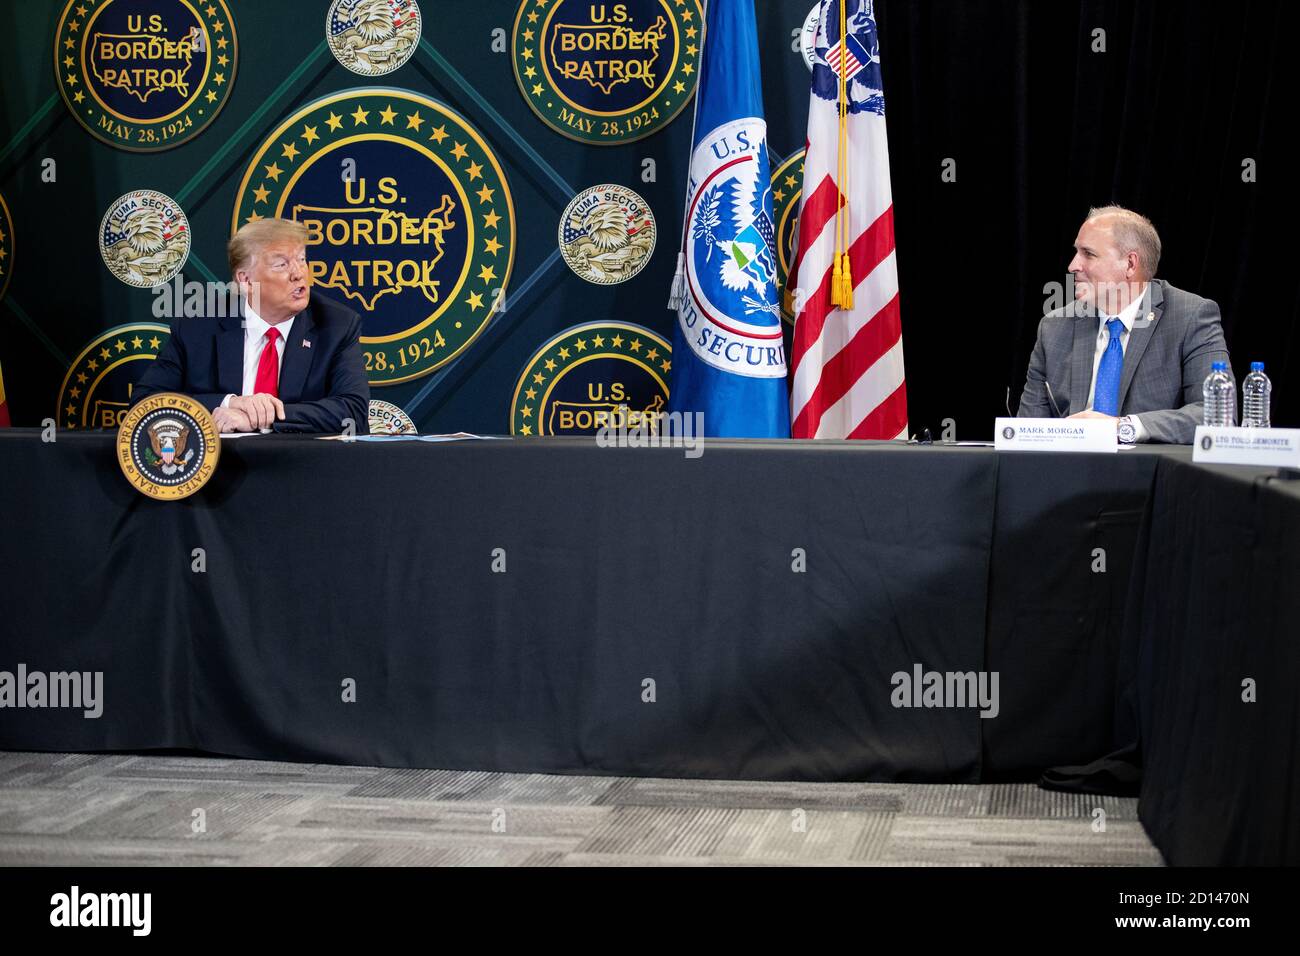 President Donald Trump, along with Acting Secretary Chad Wolf and Acting Commissioner Mark Morgan, visited the border wall in Yuma, Arizona on June 23, 2020. The visit marked the completion of 200 miles of new border wall constructed along the southwest border. Stock Photo